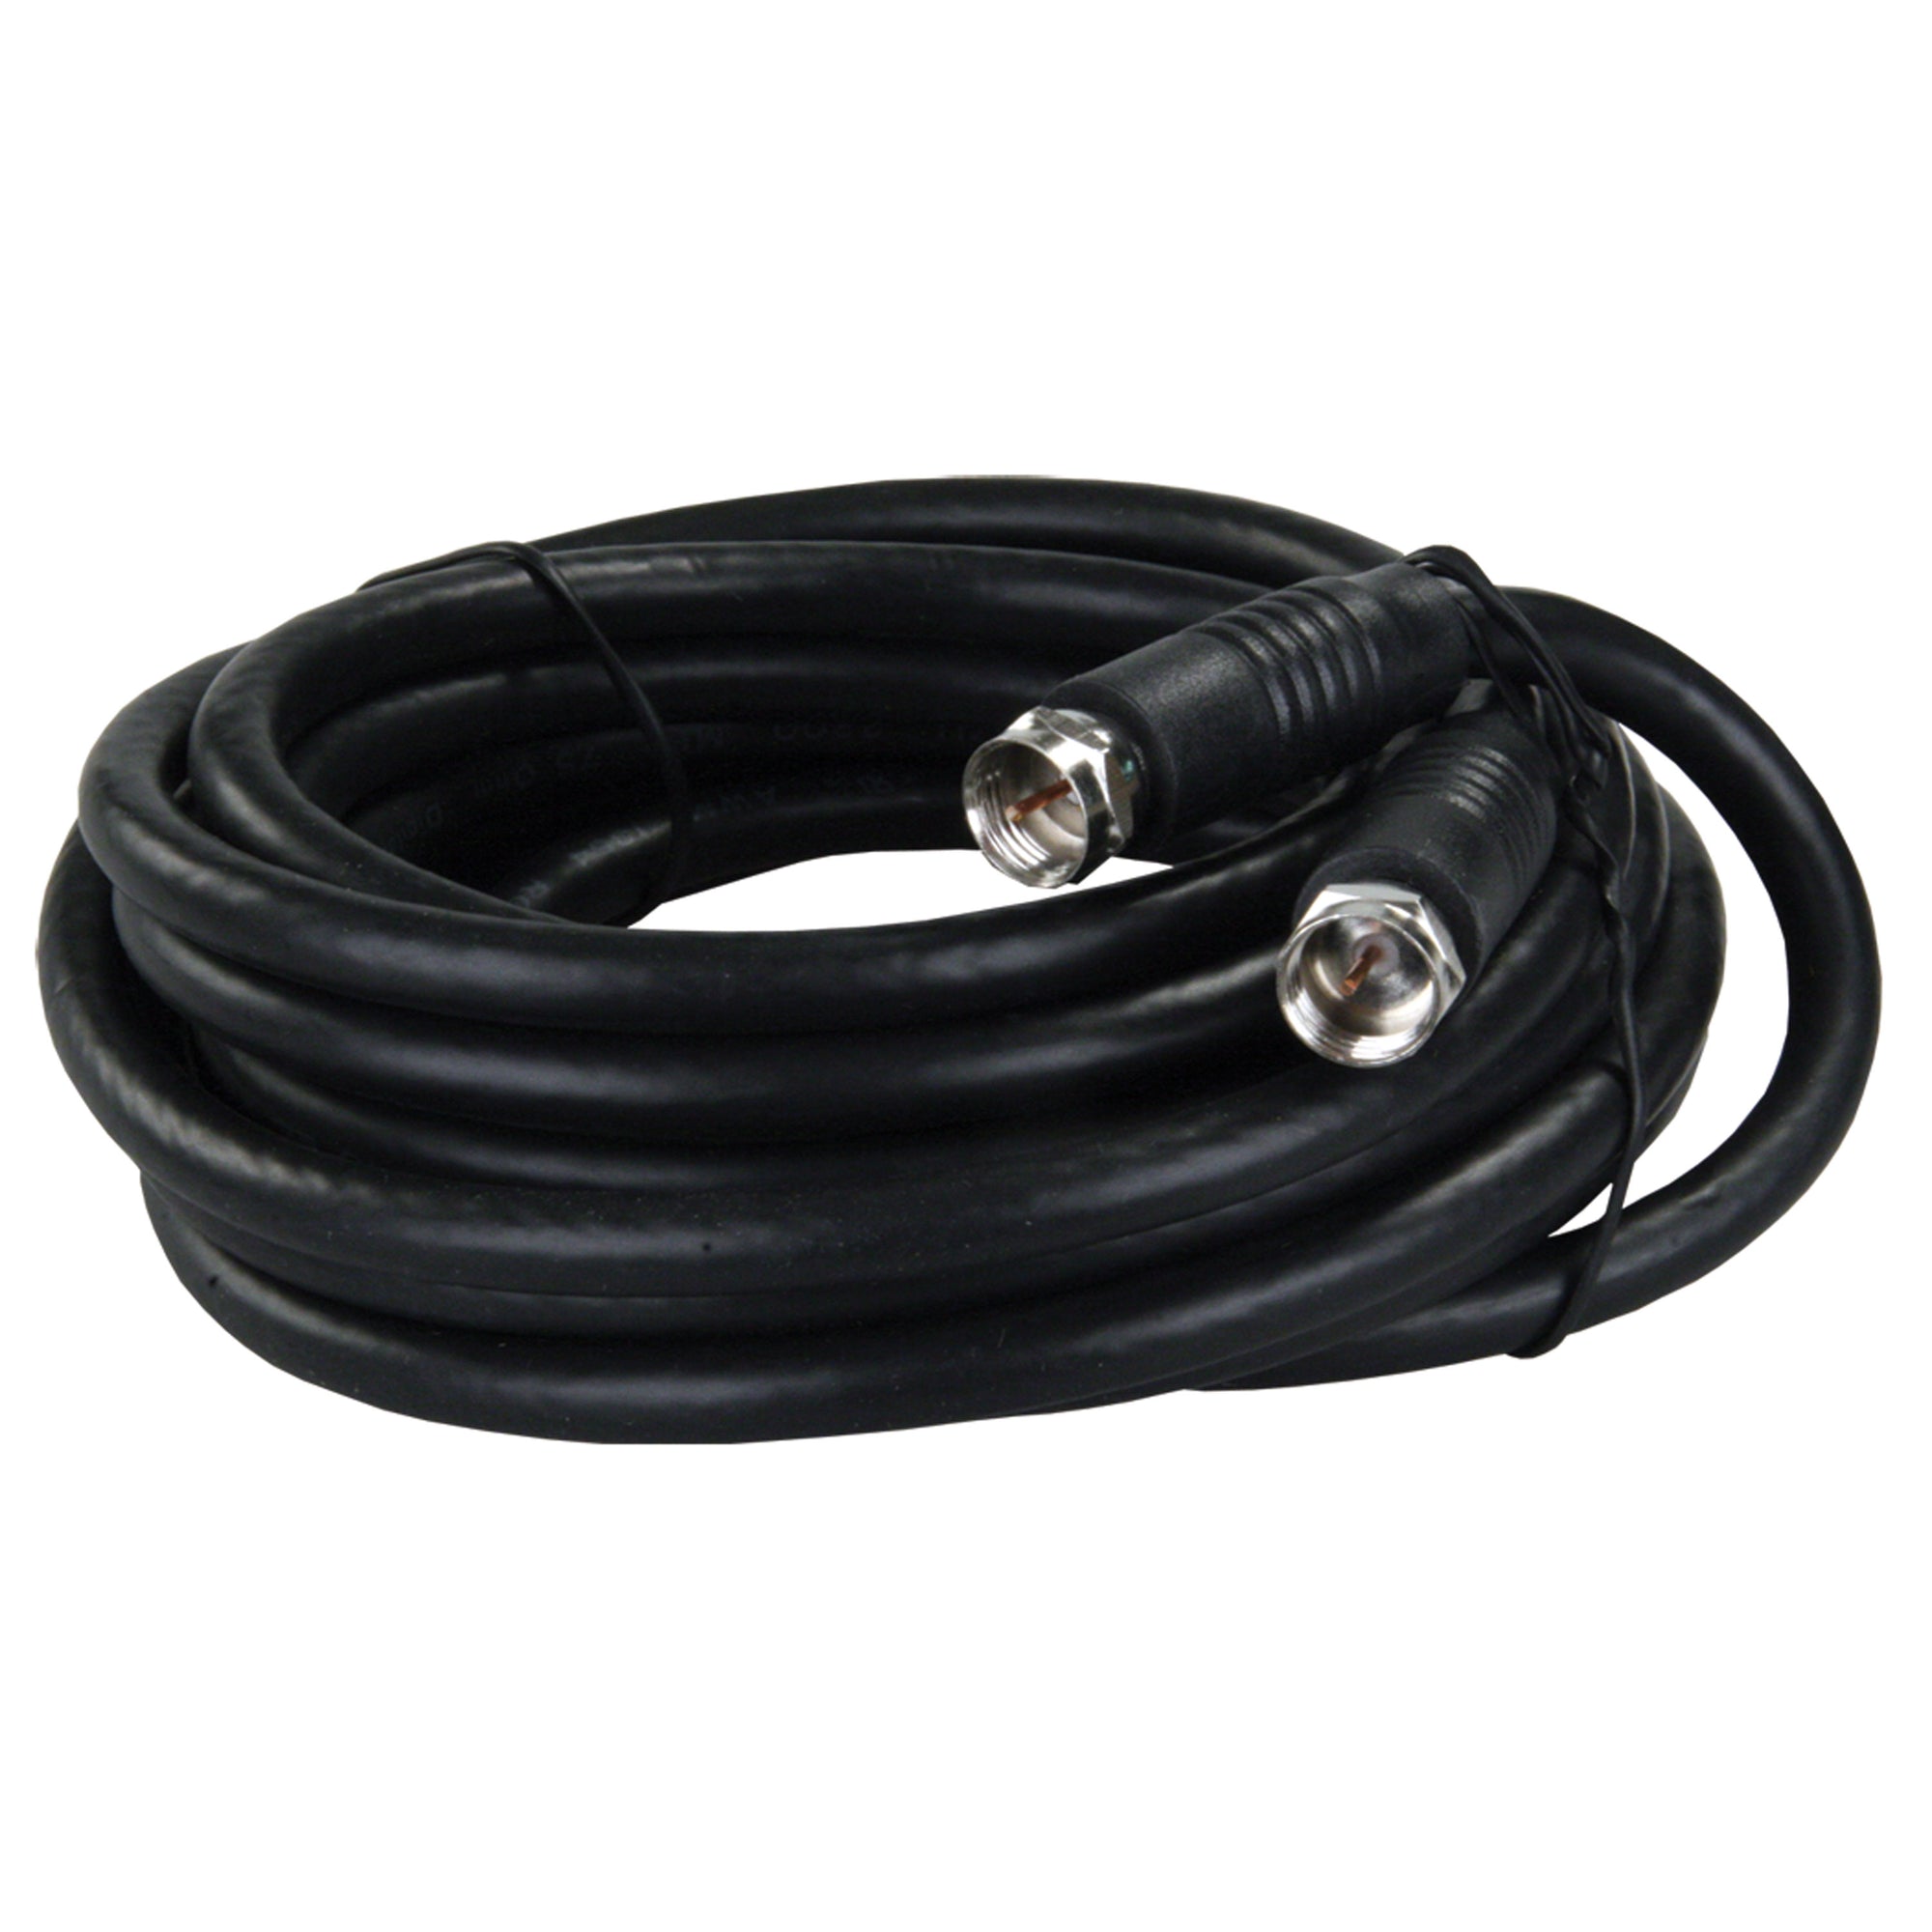 JR Products 47445 RG6 Exterior HD/Satellite Cable - 12'